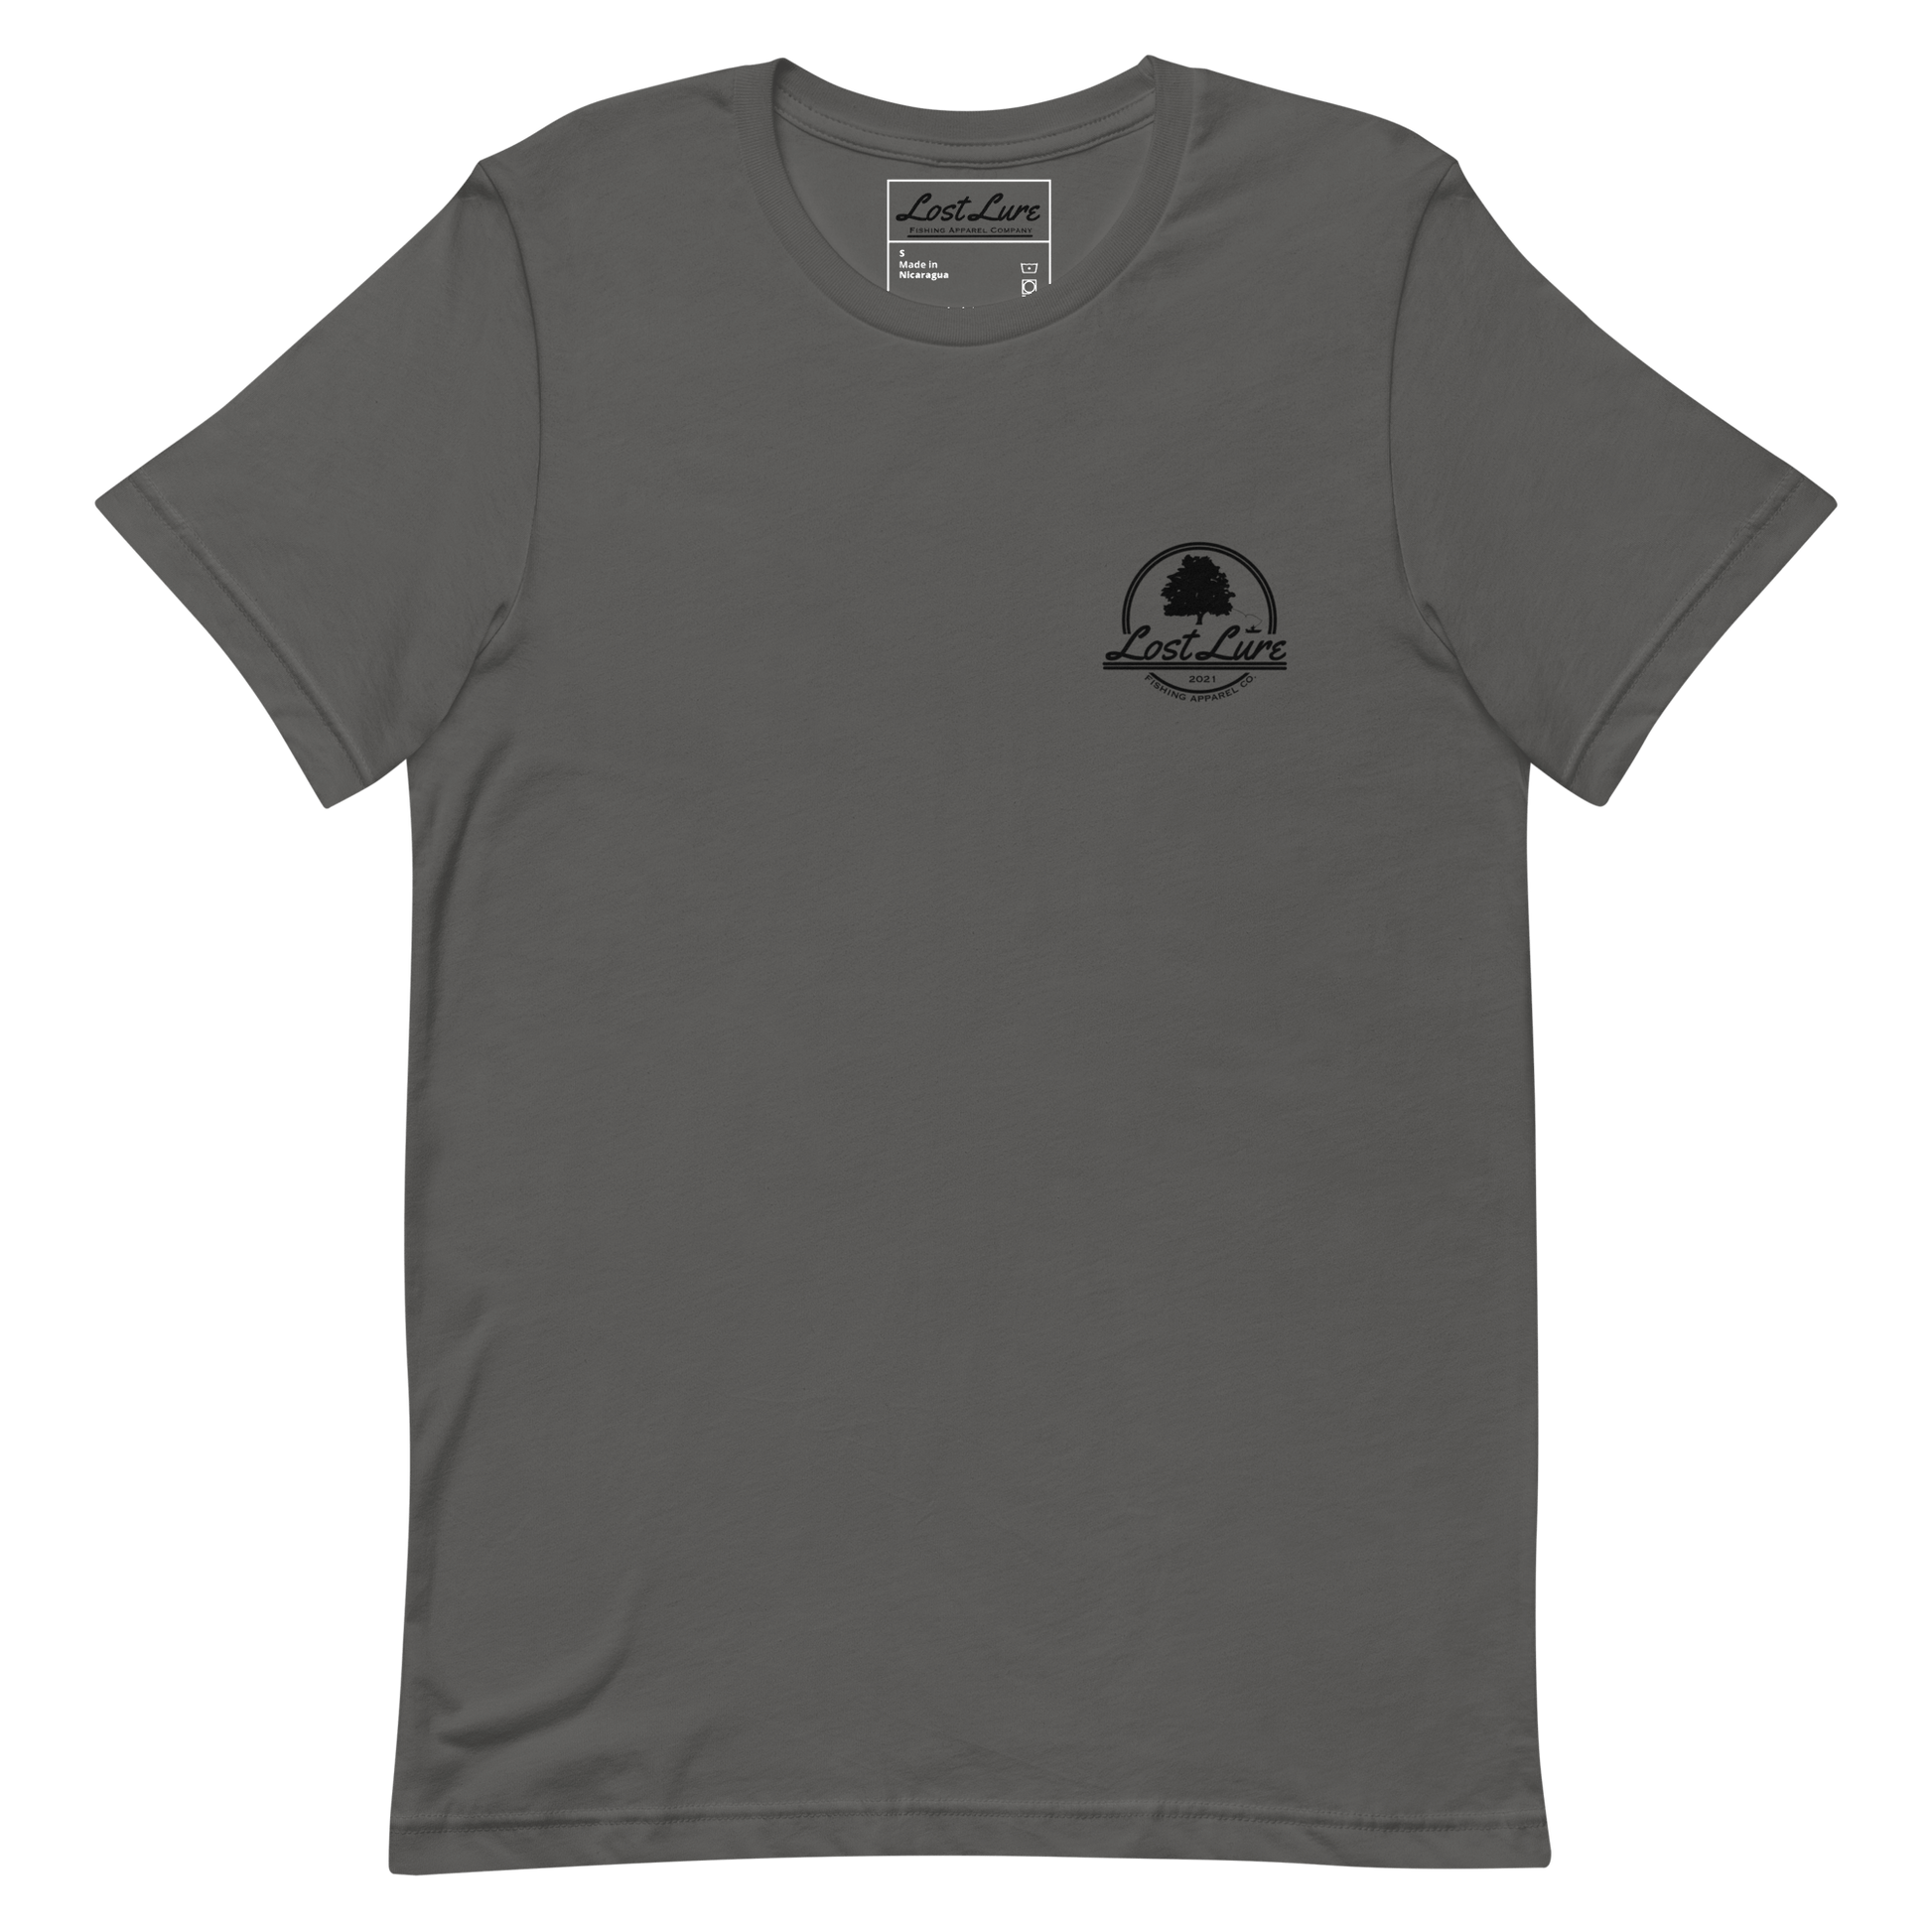 Bass fishing shirt. It has a drawing of a fat bass and it reads “lost lure co, catch fat fish”. The bass design is on the back, the lost lure logo is on the front. Gray shirt, front side